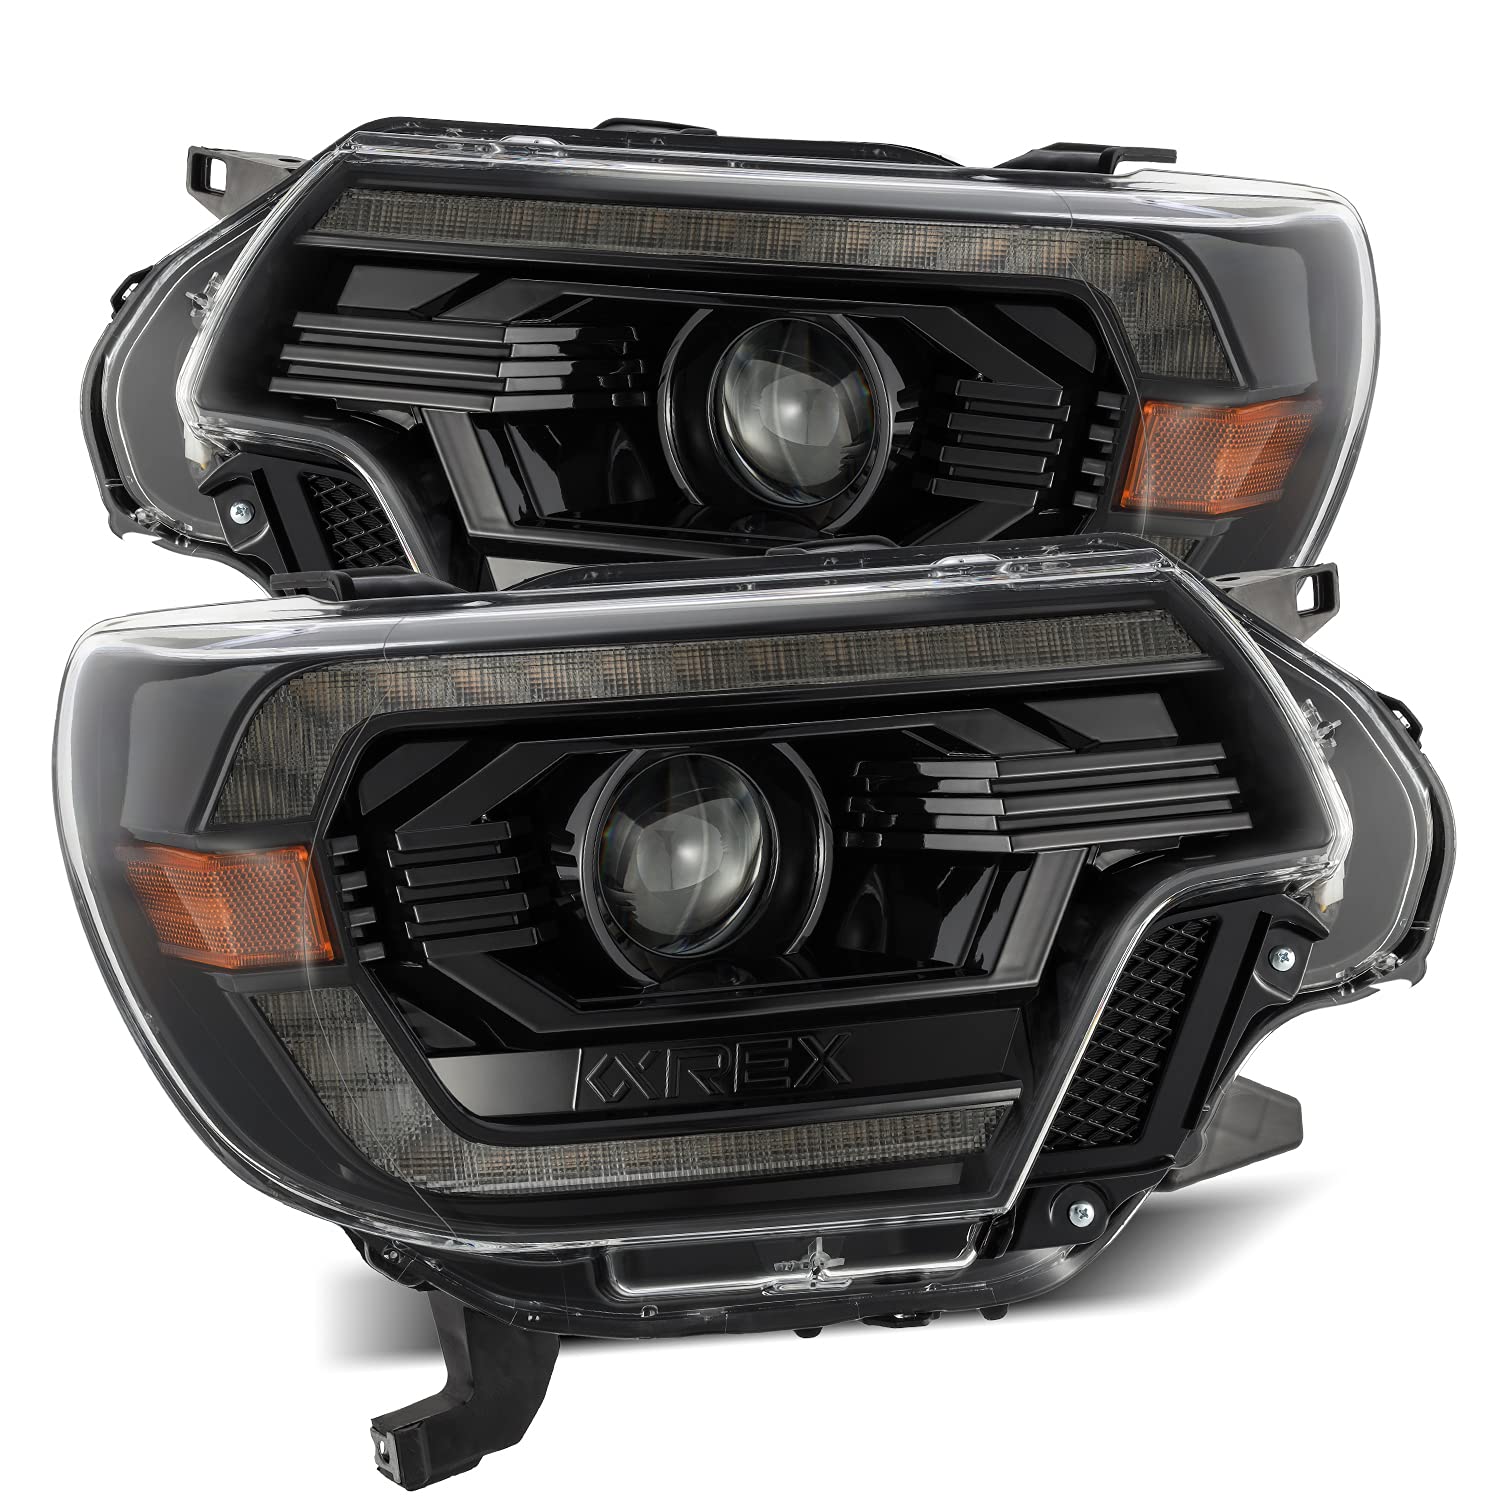 AlphaRex® 880749 - PRO-Series 2012-2015 Tacoma Projector Headlights - Alpha-Black (Driver & Passenger) Assembly Replacement